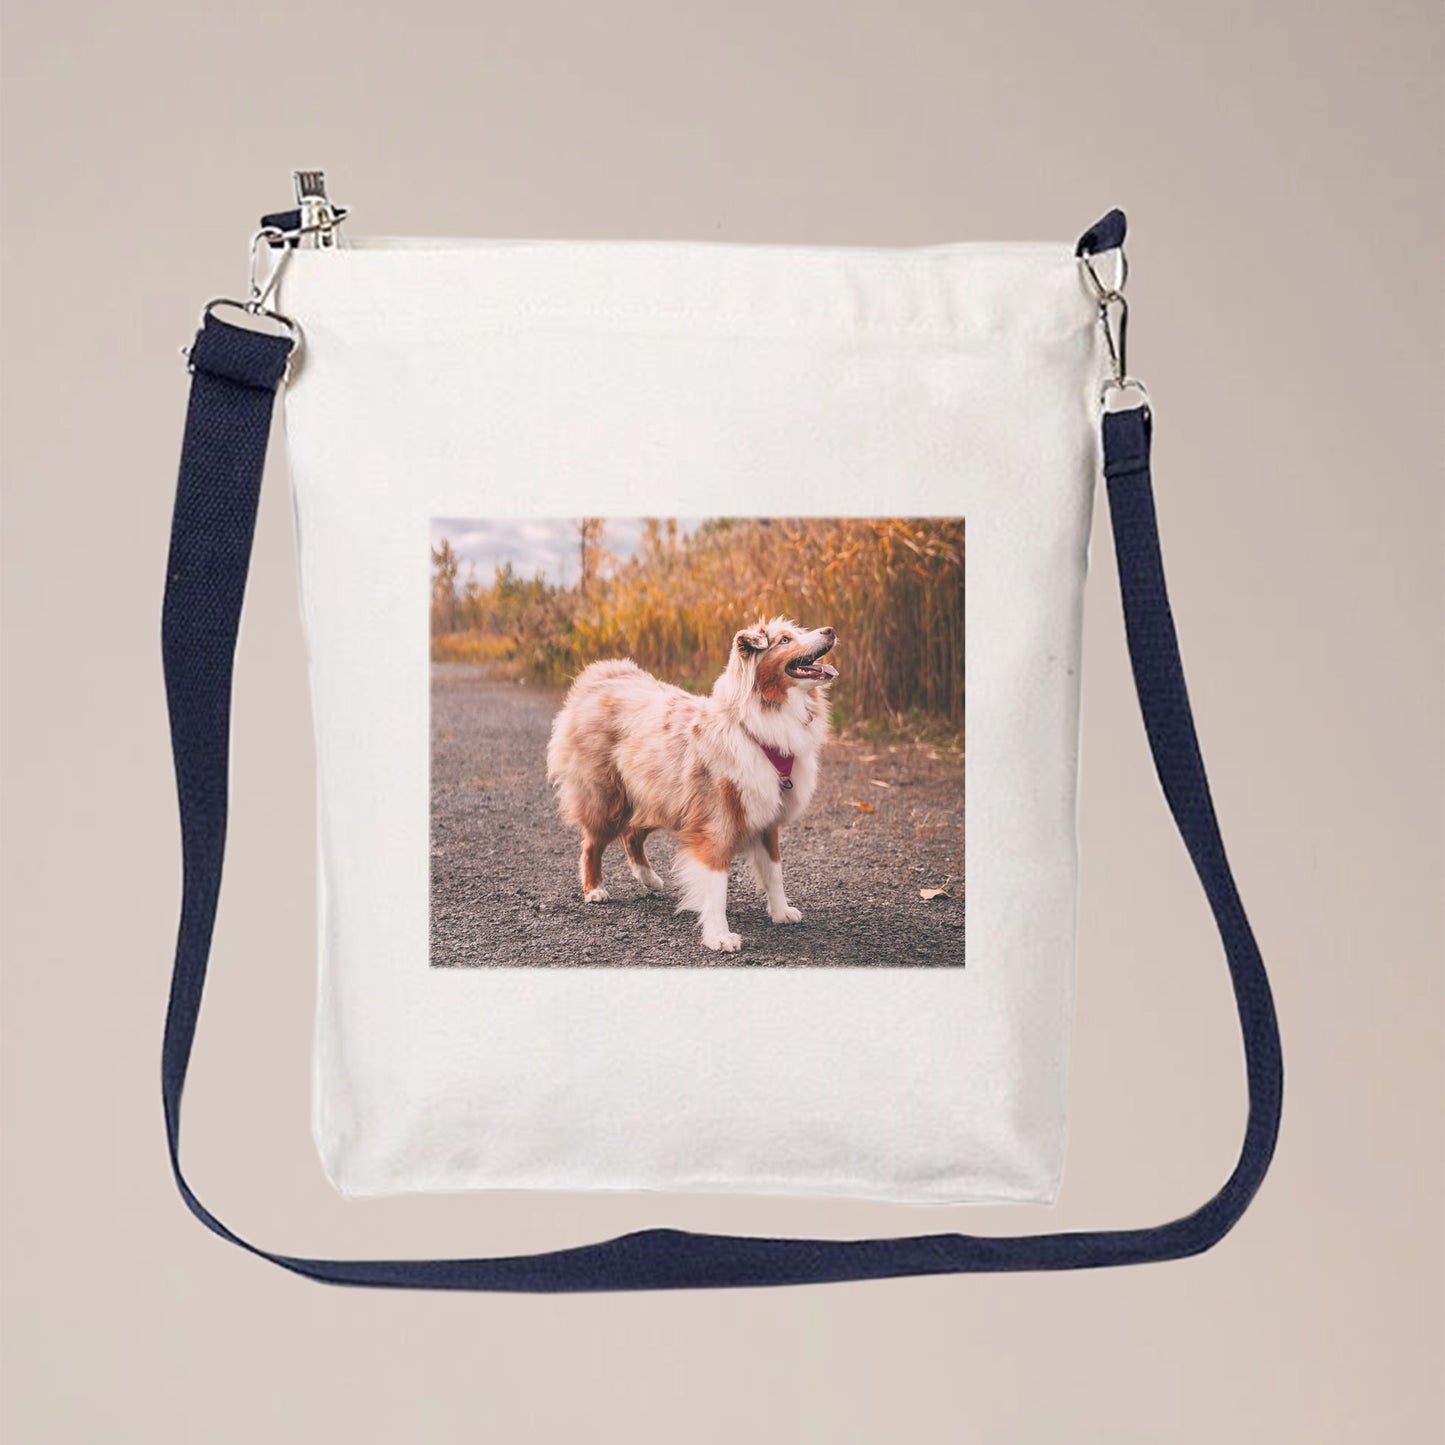 A photo of a dog is printed on a white crossbody bag with a long, blue, adjustable strap. People can personalize this crossbody bag with their own photos, pet photos, initials, logos, text, etc.